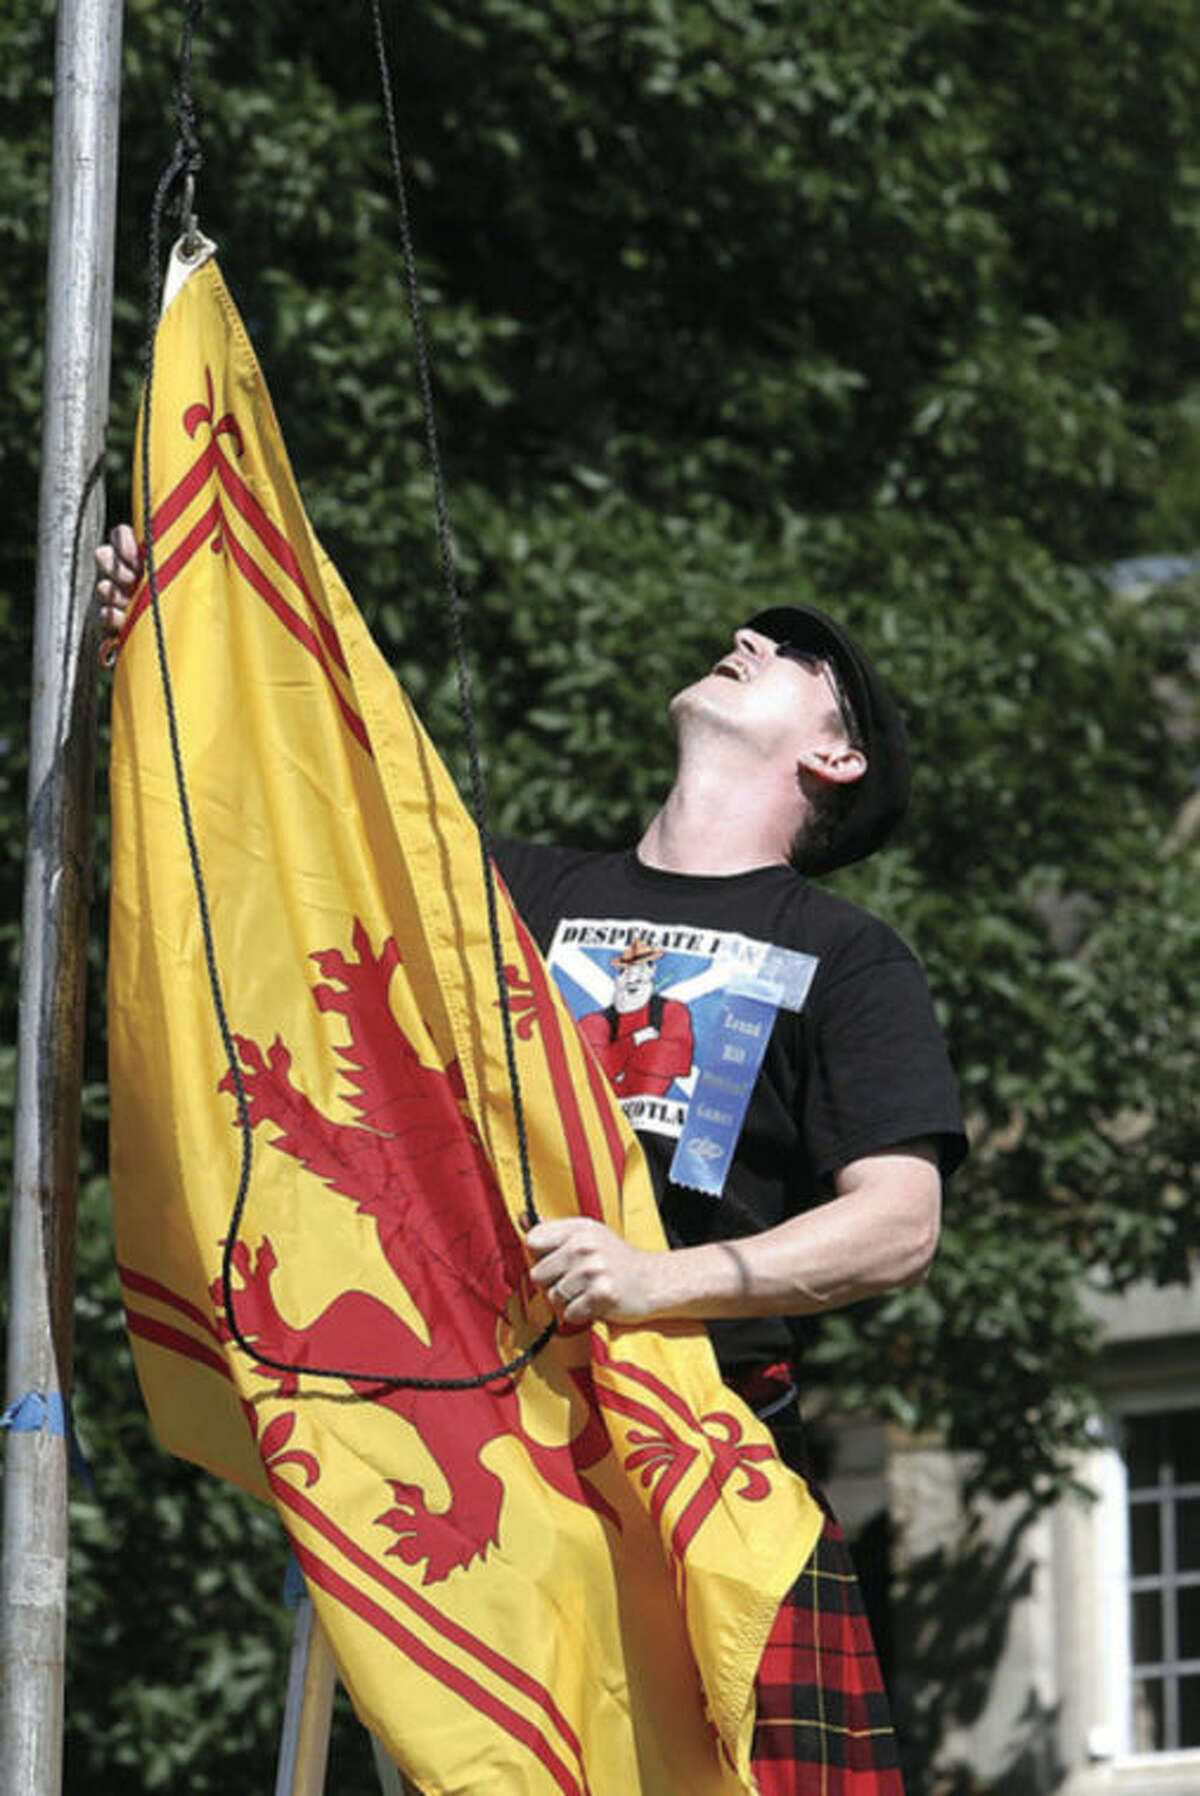 Hour photo / David Esposito Bruce Kennedy of Stamford raises the Flag of Scotland which features the "Lion Rampant" at the 84th annual Round Hill Highland Games Saturday at Cranbury Park.